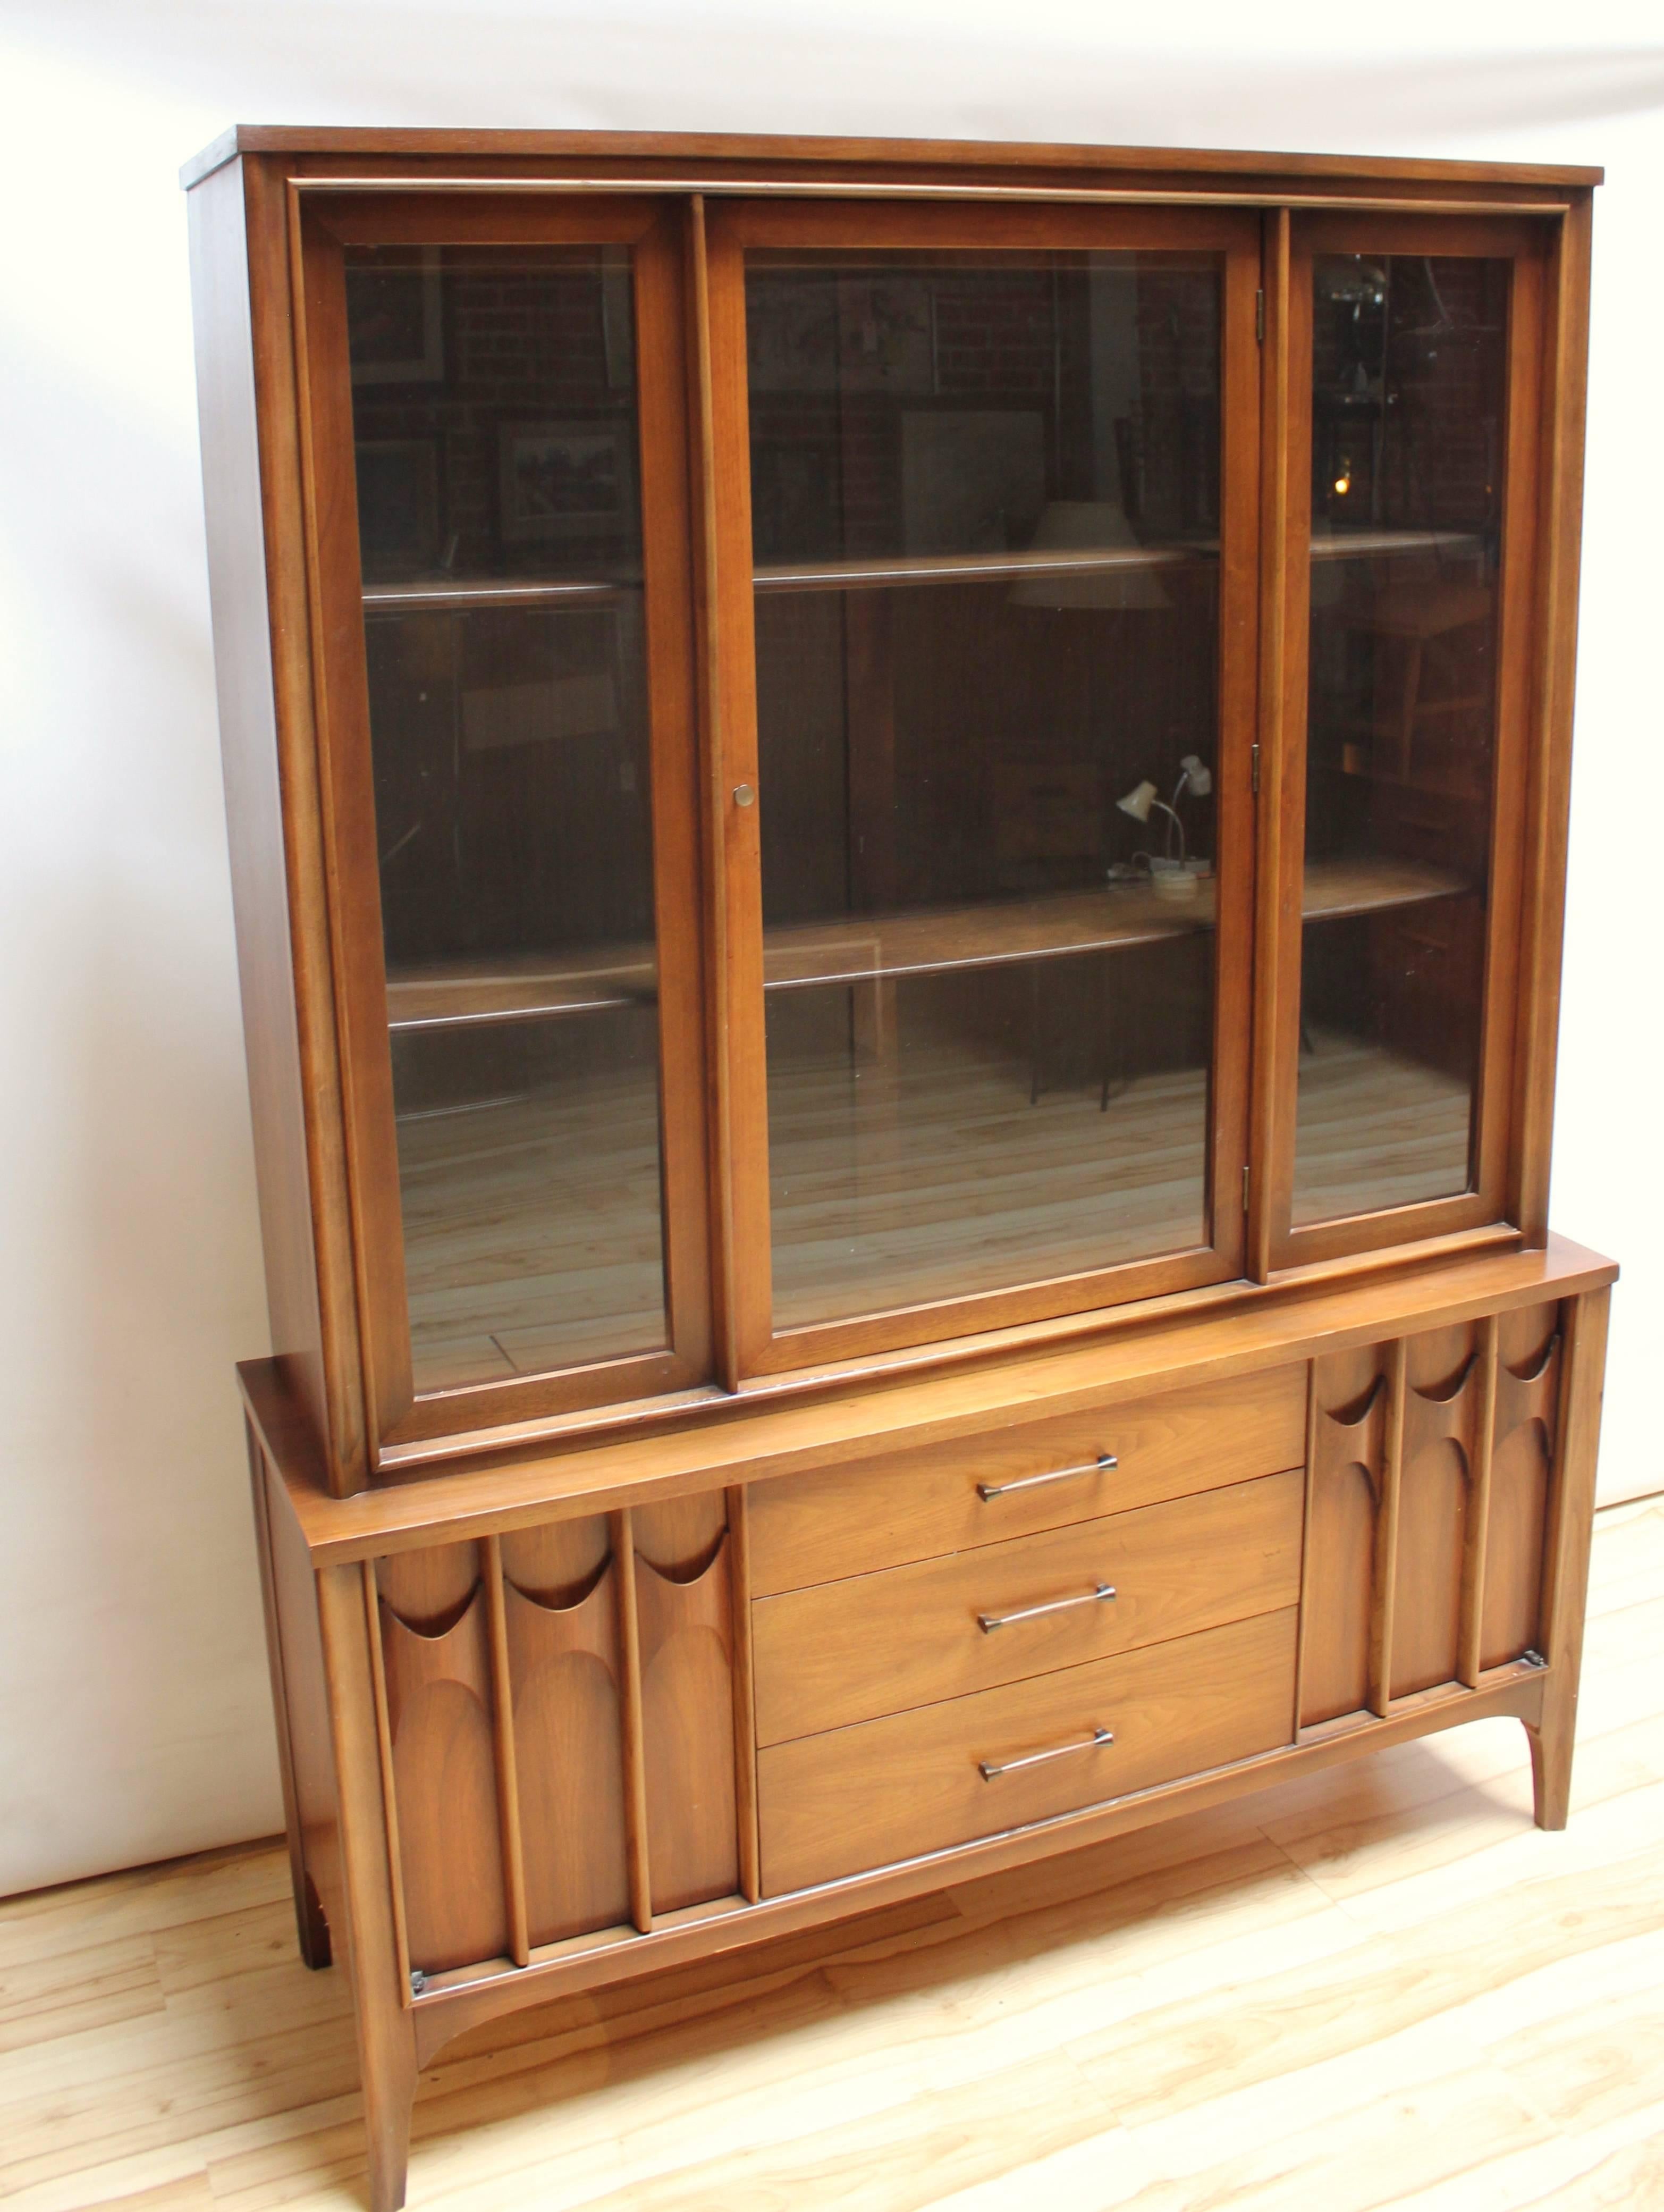 Mid-Century Modern china hutch designed by Kent Coffey for the Perspecta series. The hutch top is has glass windows and door, and the bottom features three drawers and two side cabinets.